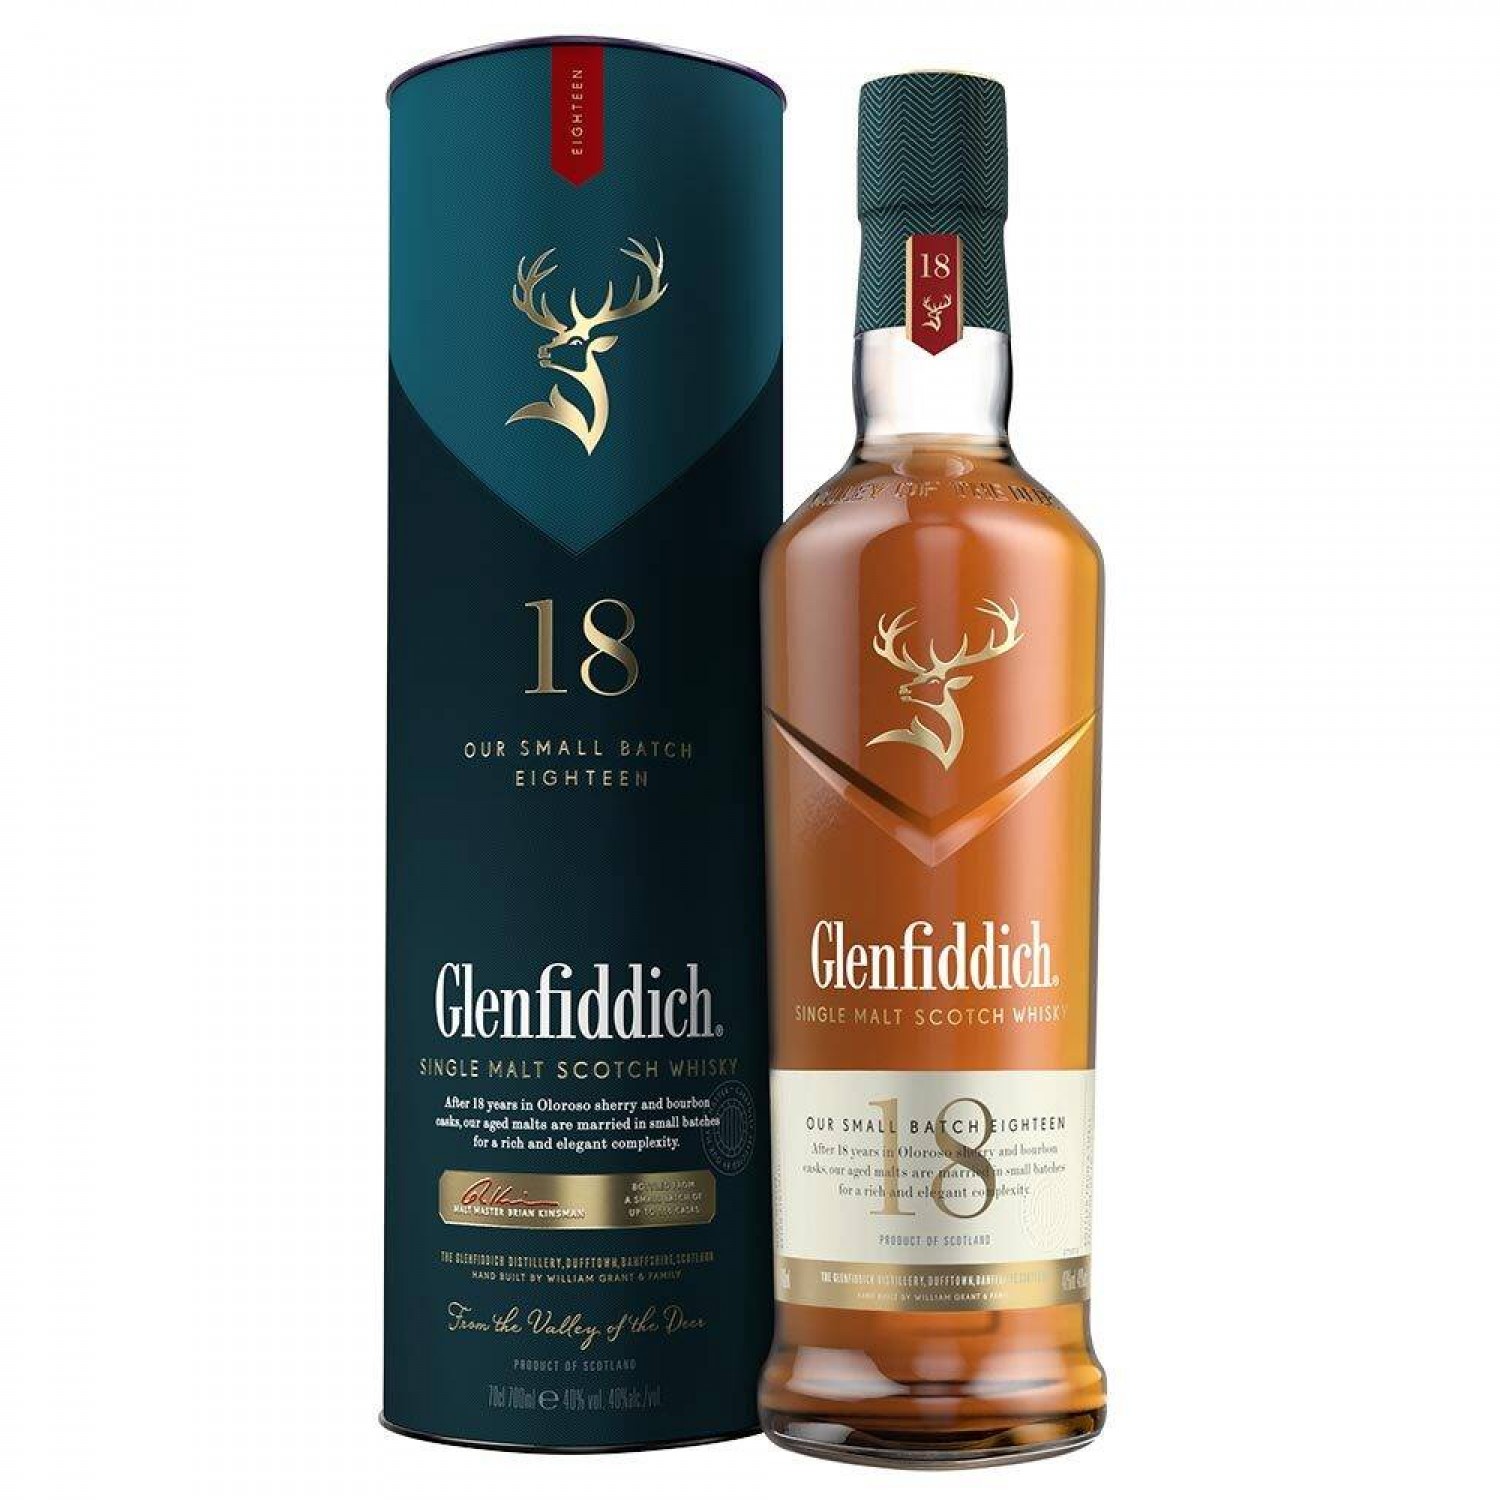 Glenfiddich 18 Years Old Single Malt Scotch Whisky 700ml (Small Batch New Package)